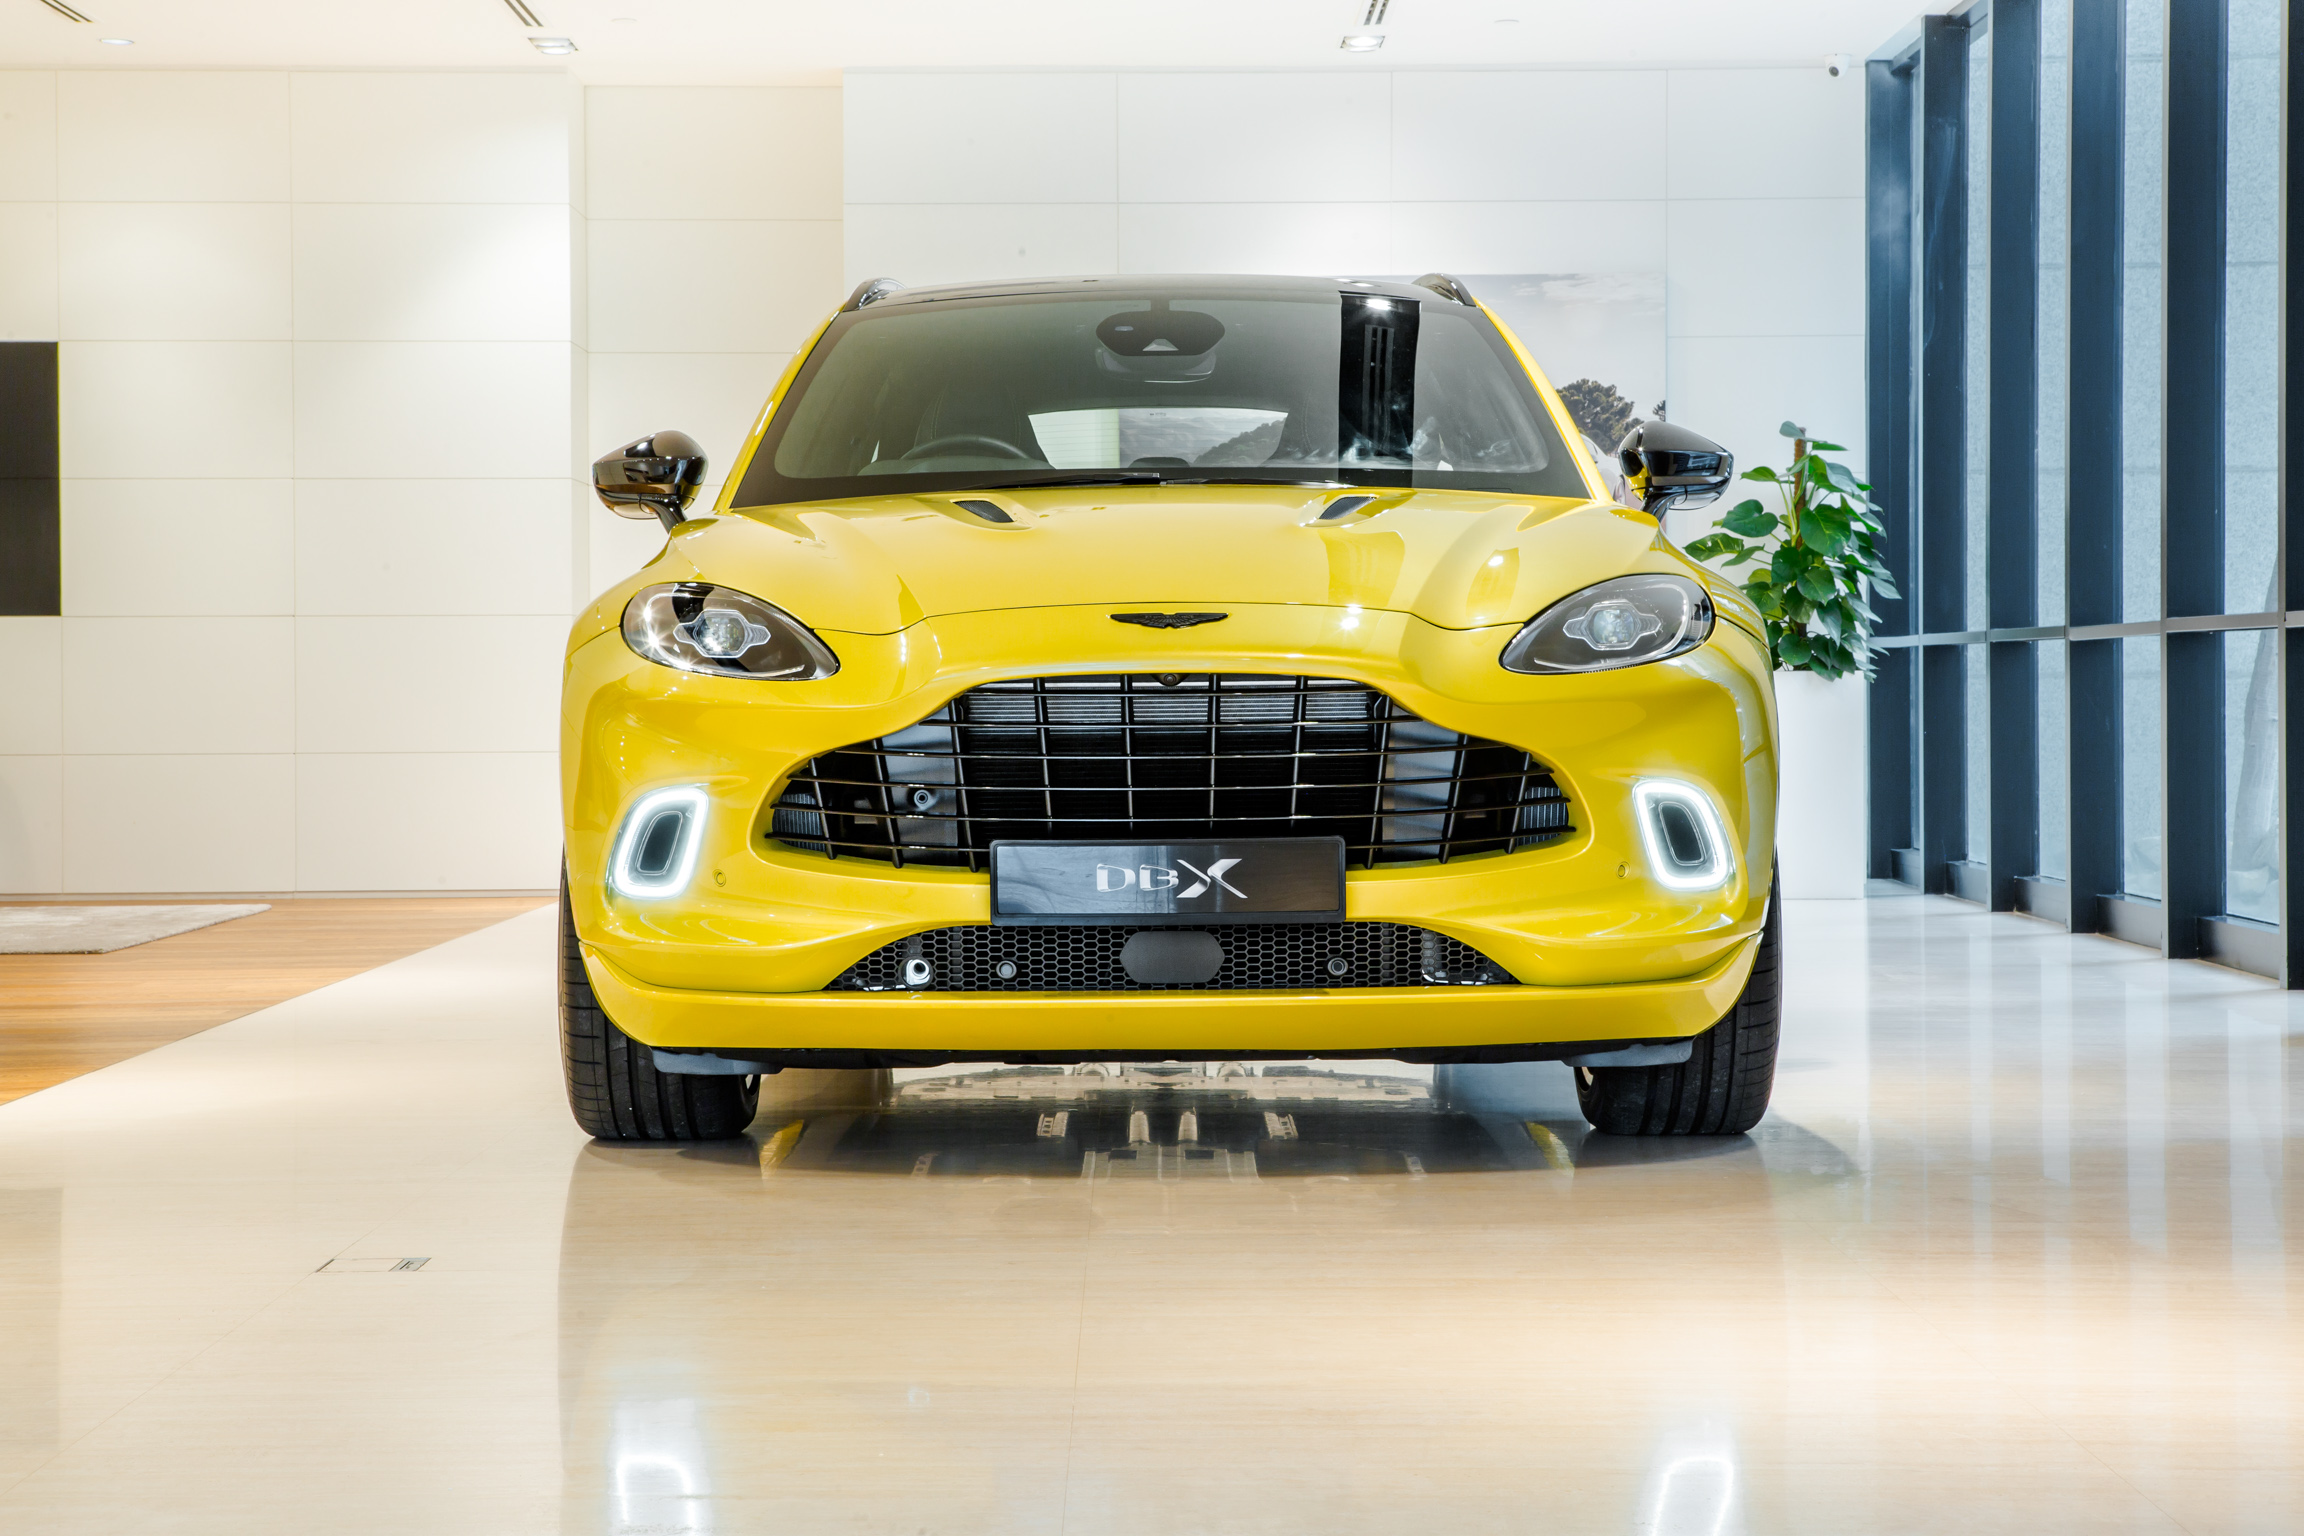 This is how you get an Aston Martin DBX with two extra years of warranty